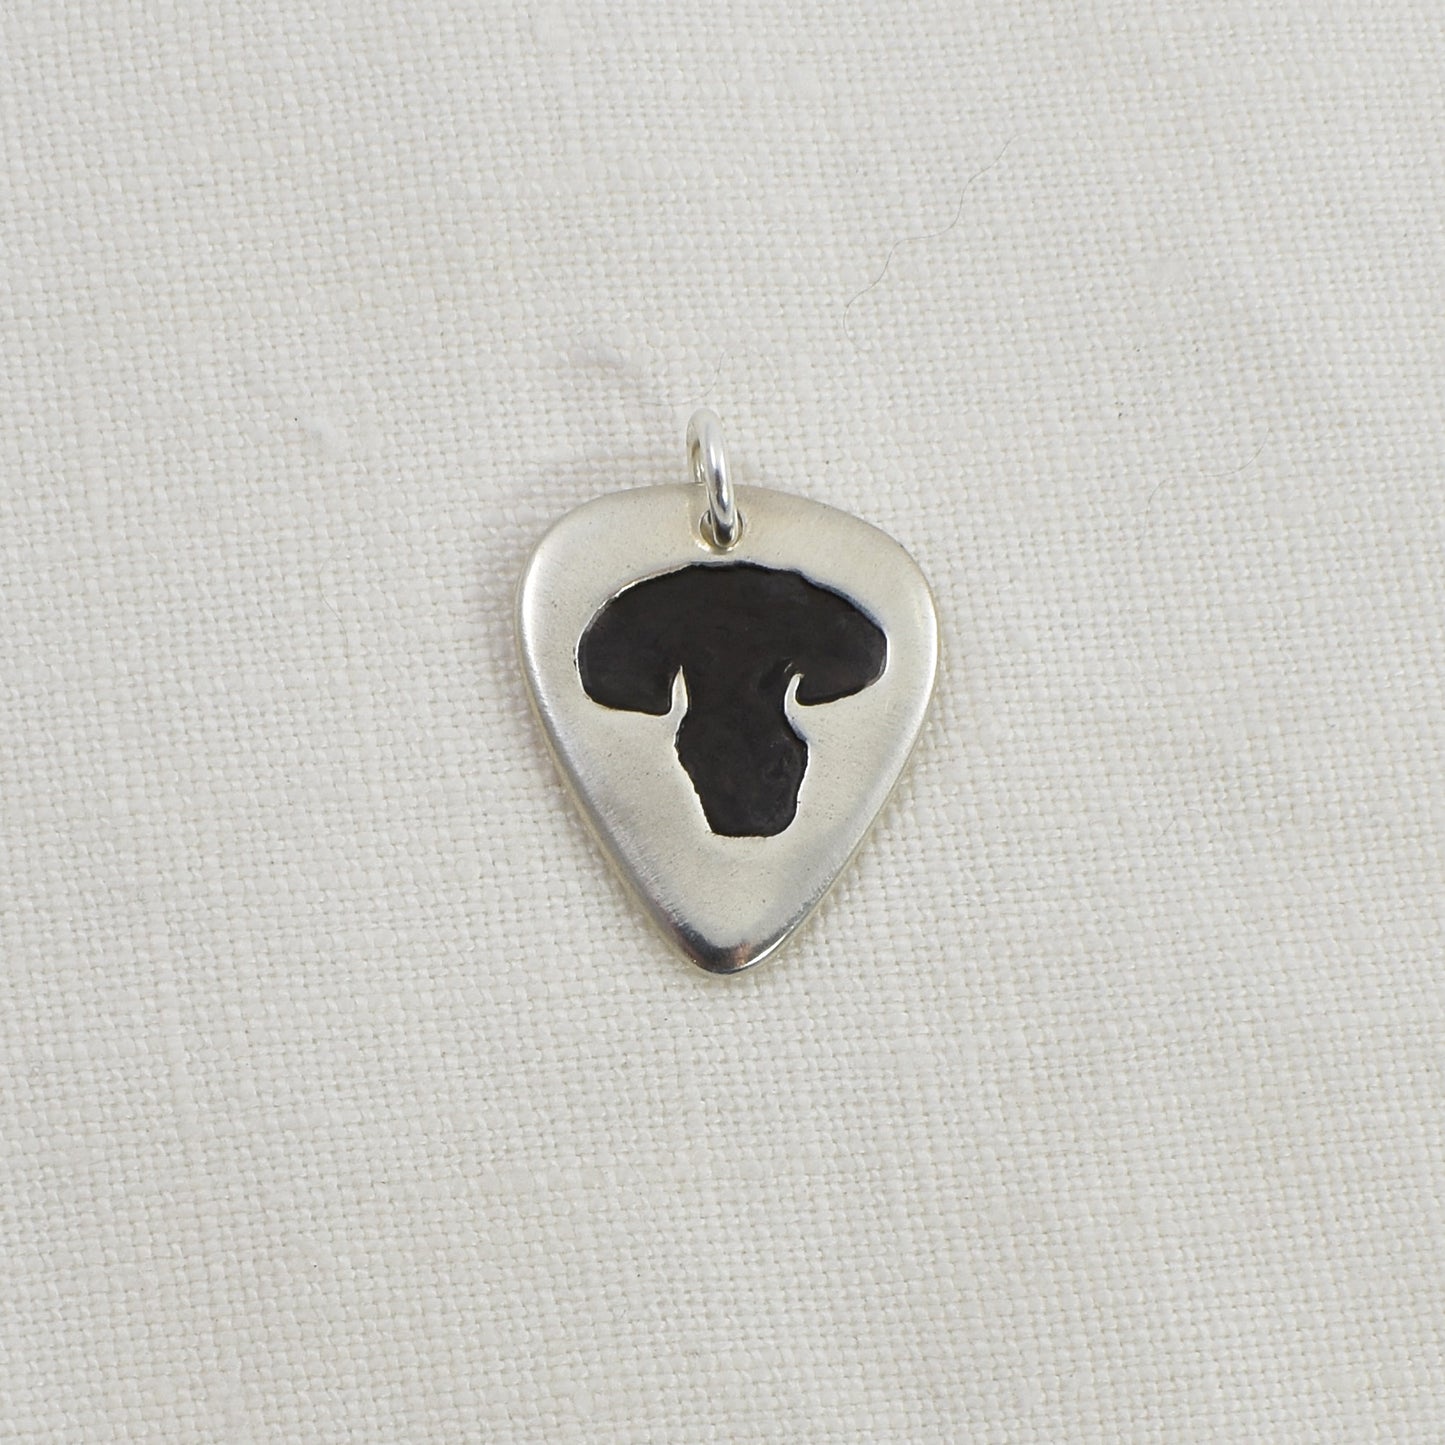 Dog Nose Guitar Pick Pendant Example of all black dog nose